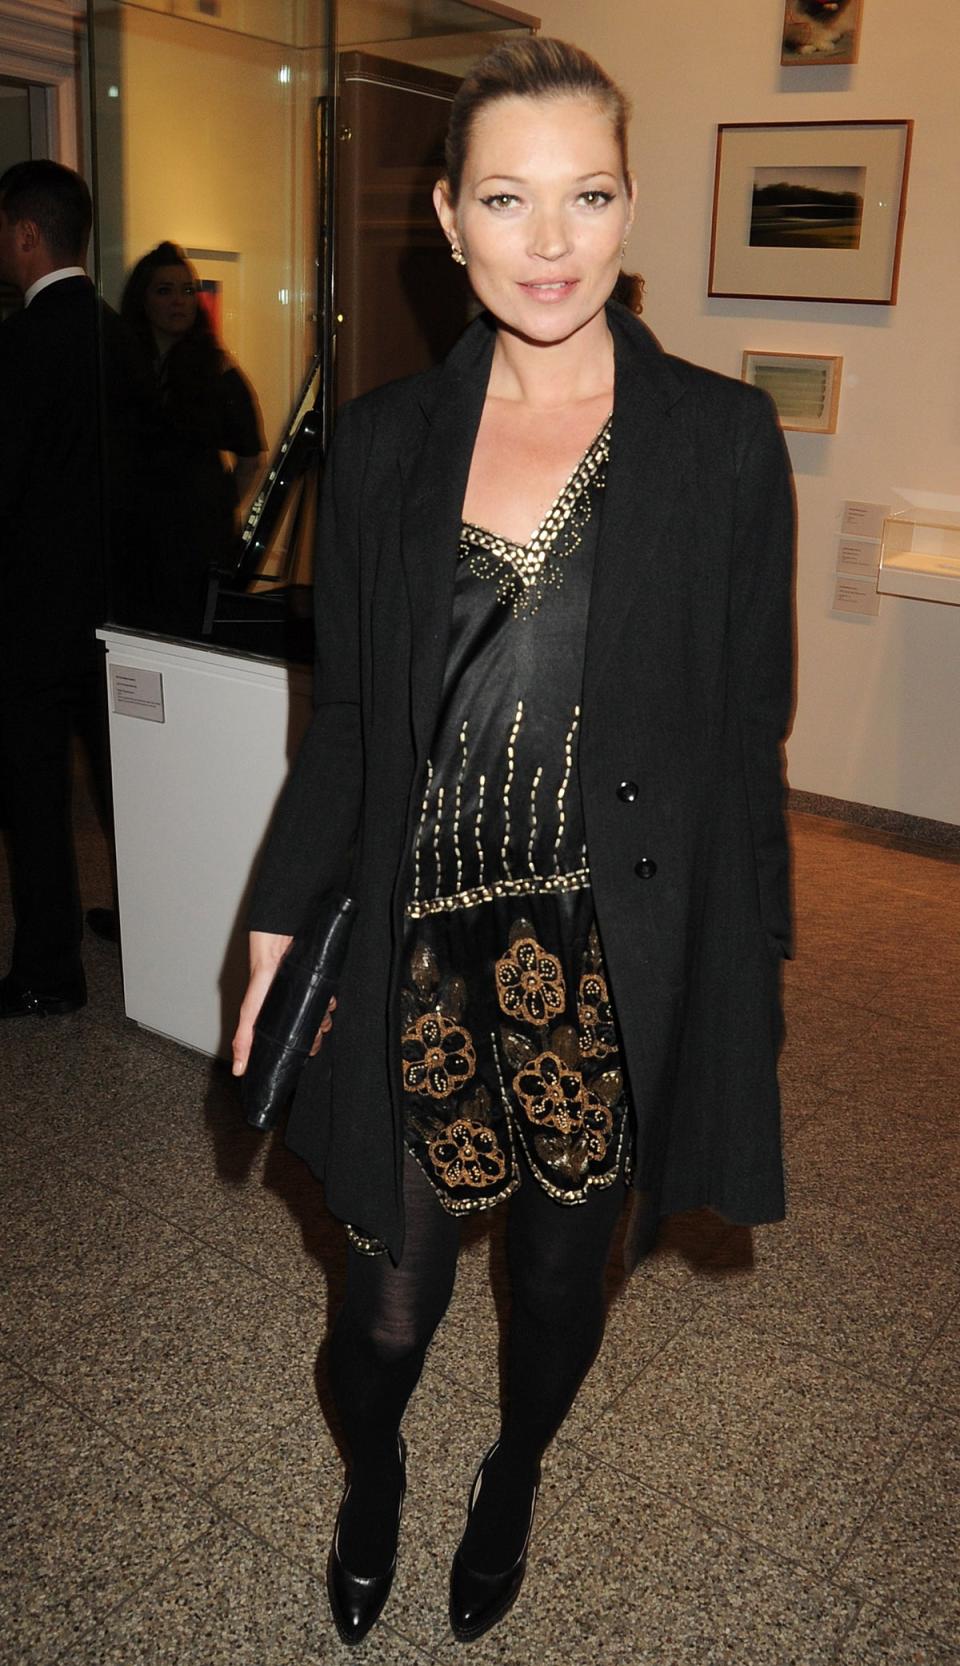 at the Art Plus Music Party, at the Whitechapel Gallery on April 22, 2010 (Getty Images)